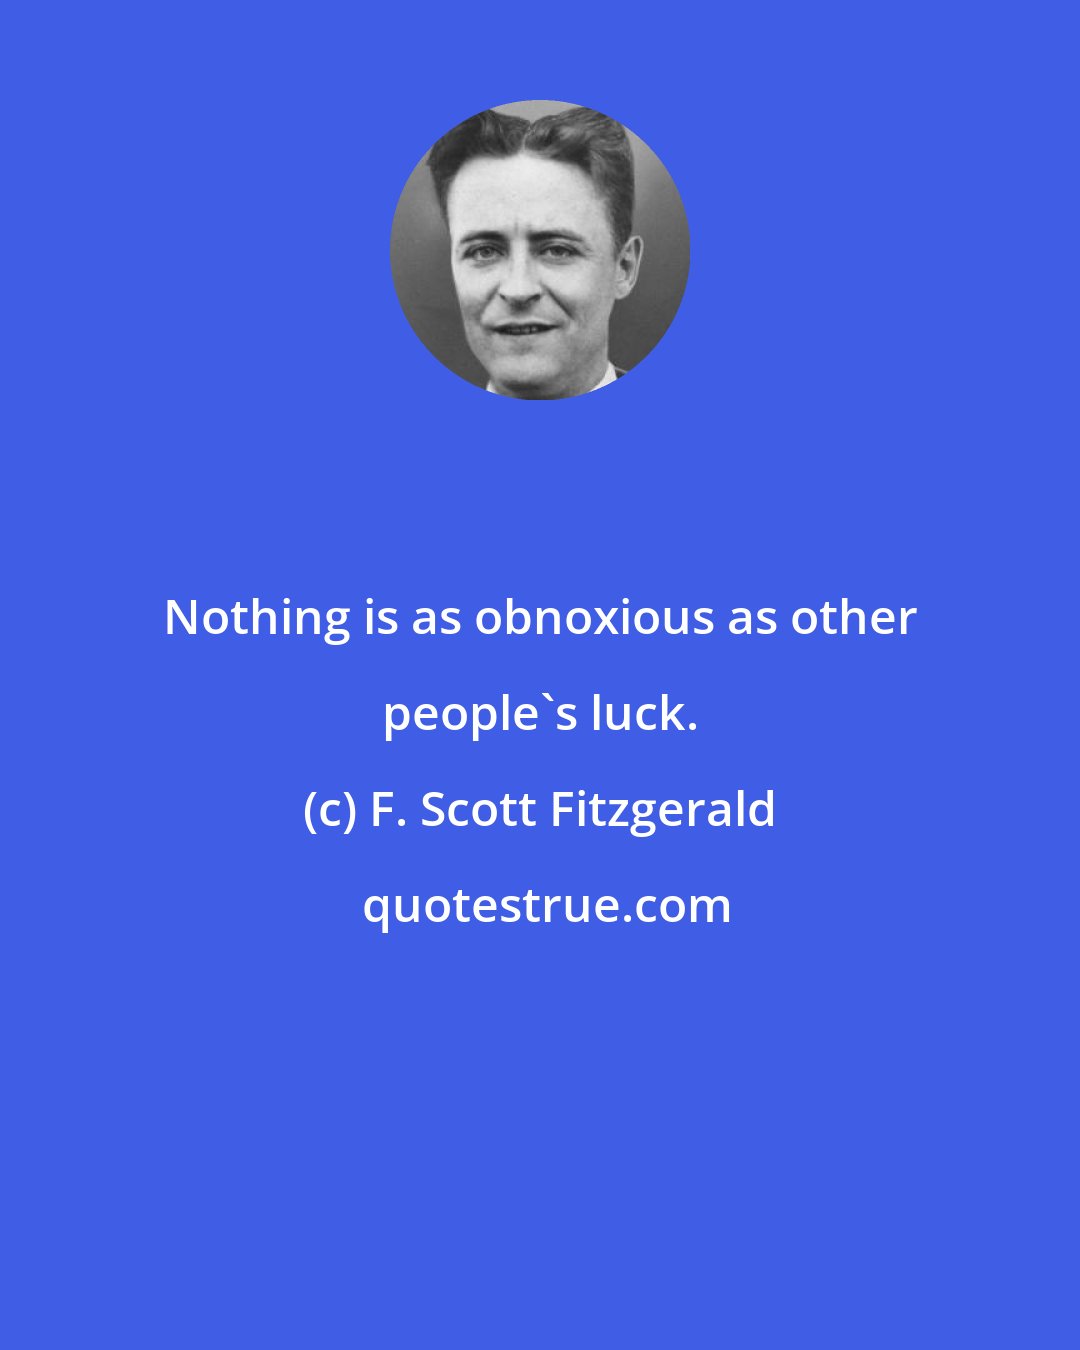 F. Scott Fitzgerald: Nothing is as obnoxious as other people's luck.